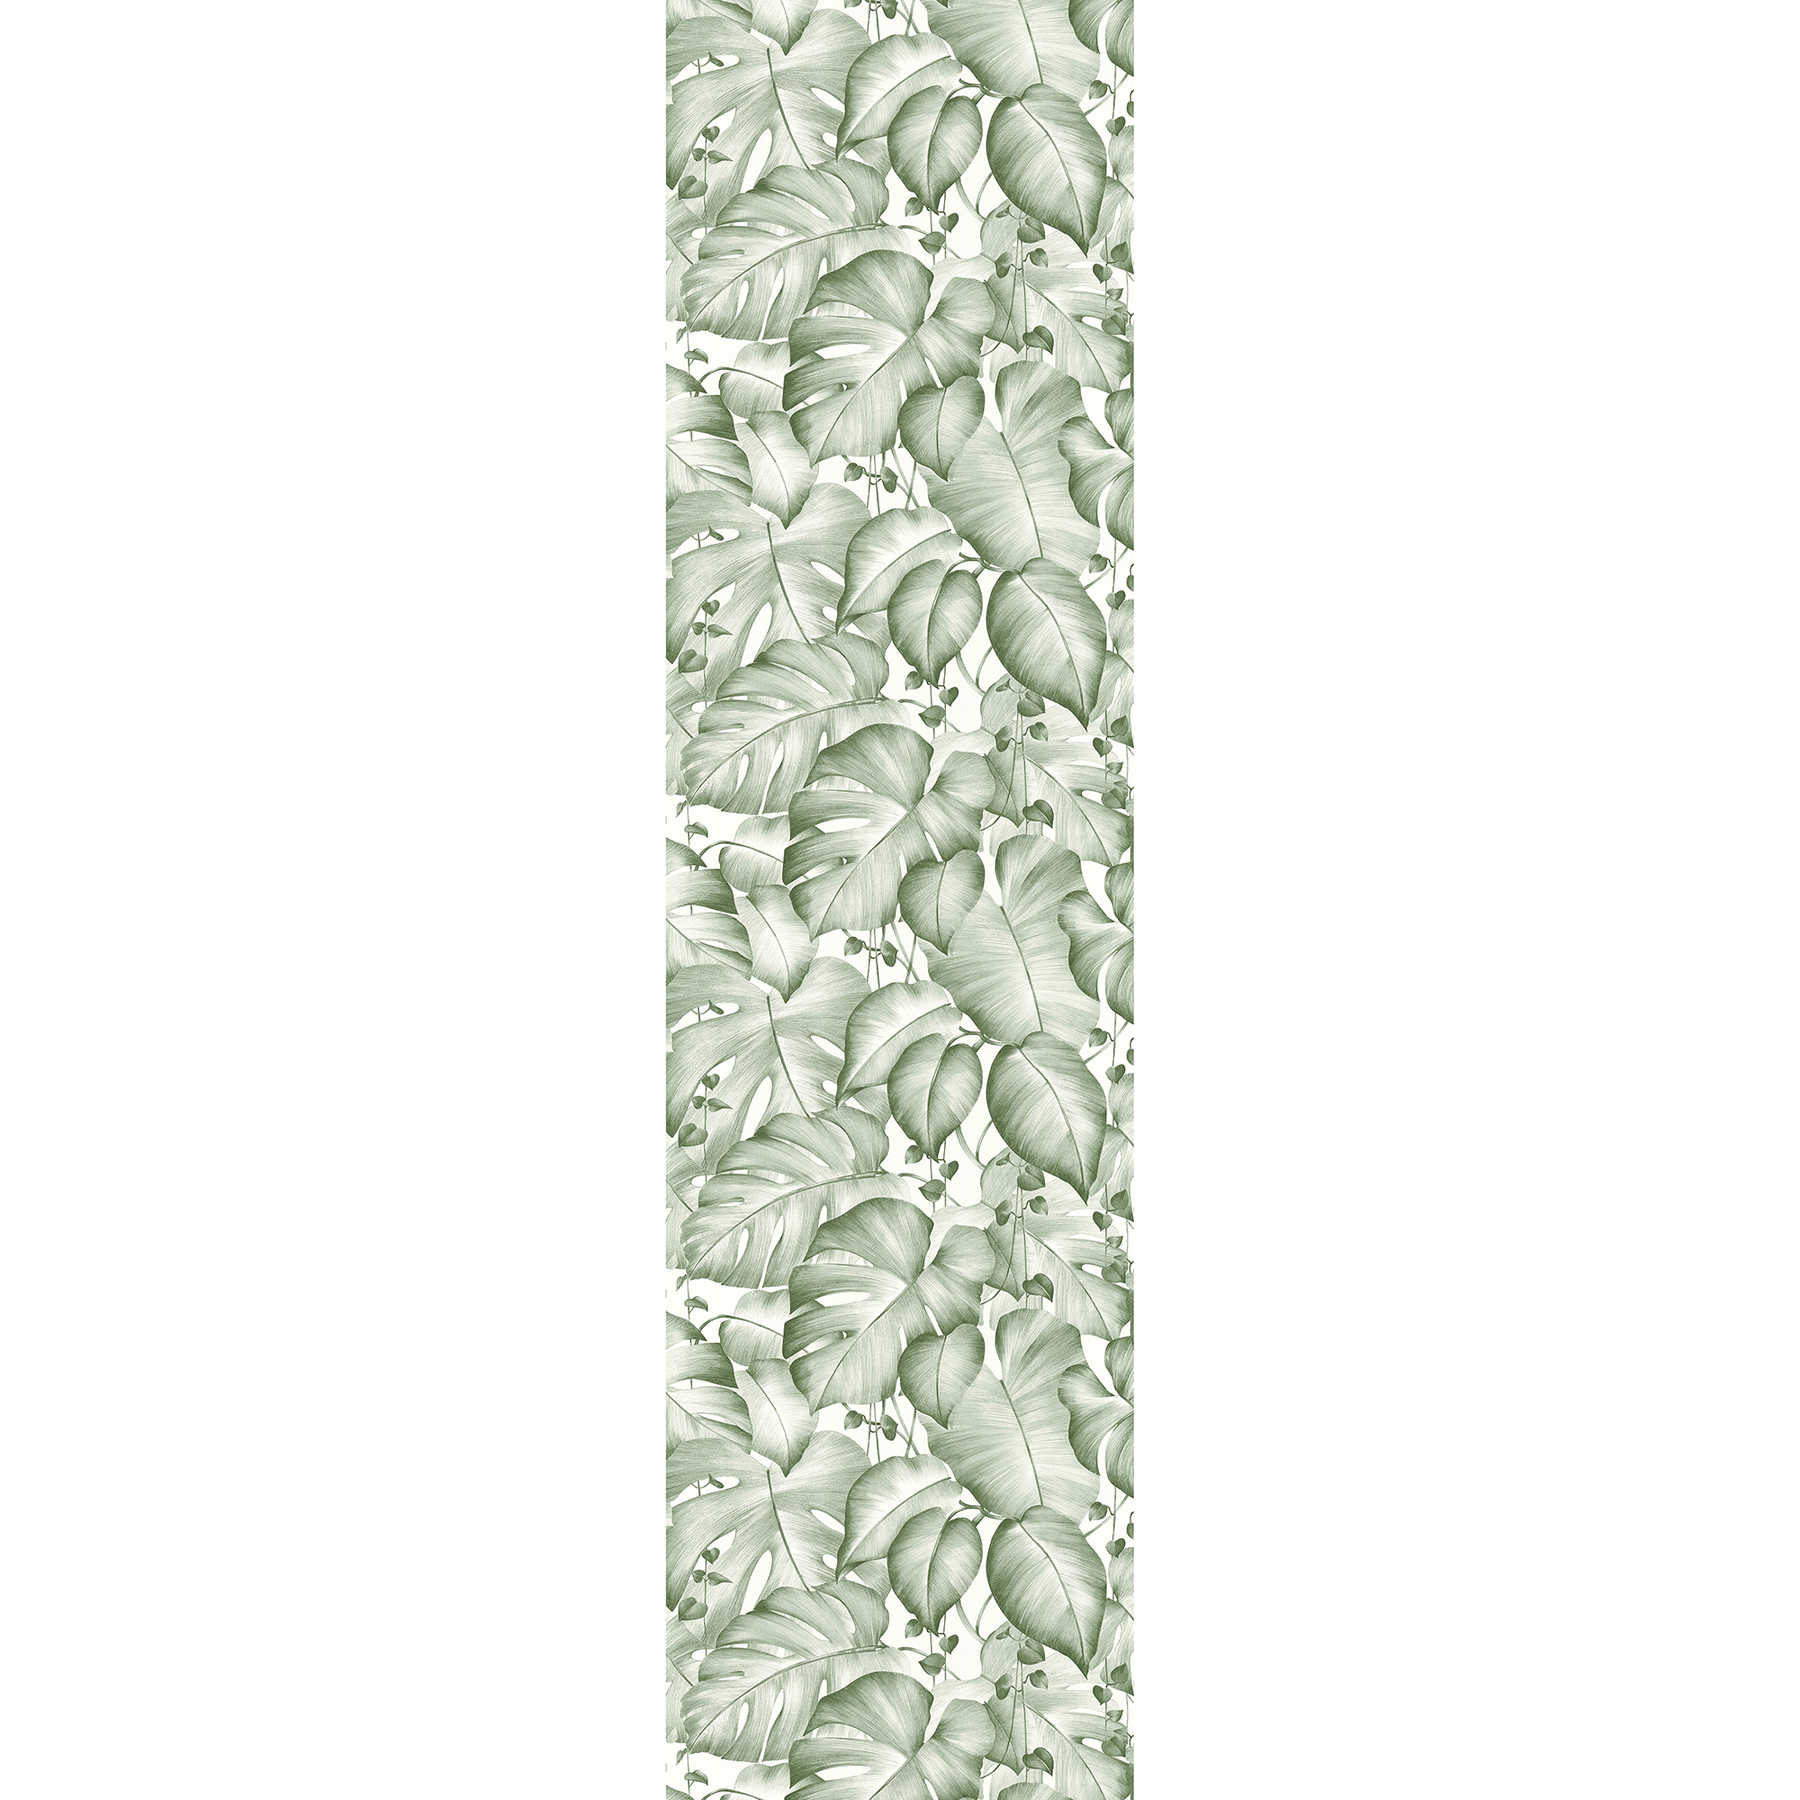         Design panel self-adhesive with Monstera leaves - Green, White
    